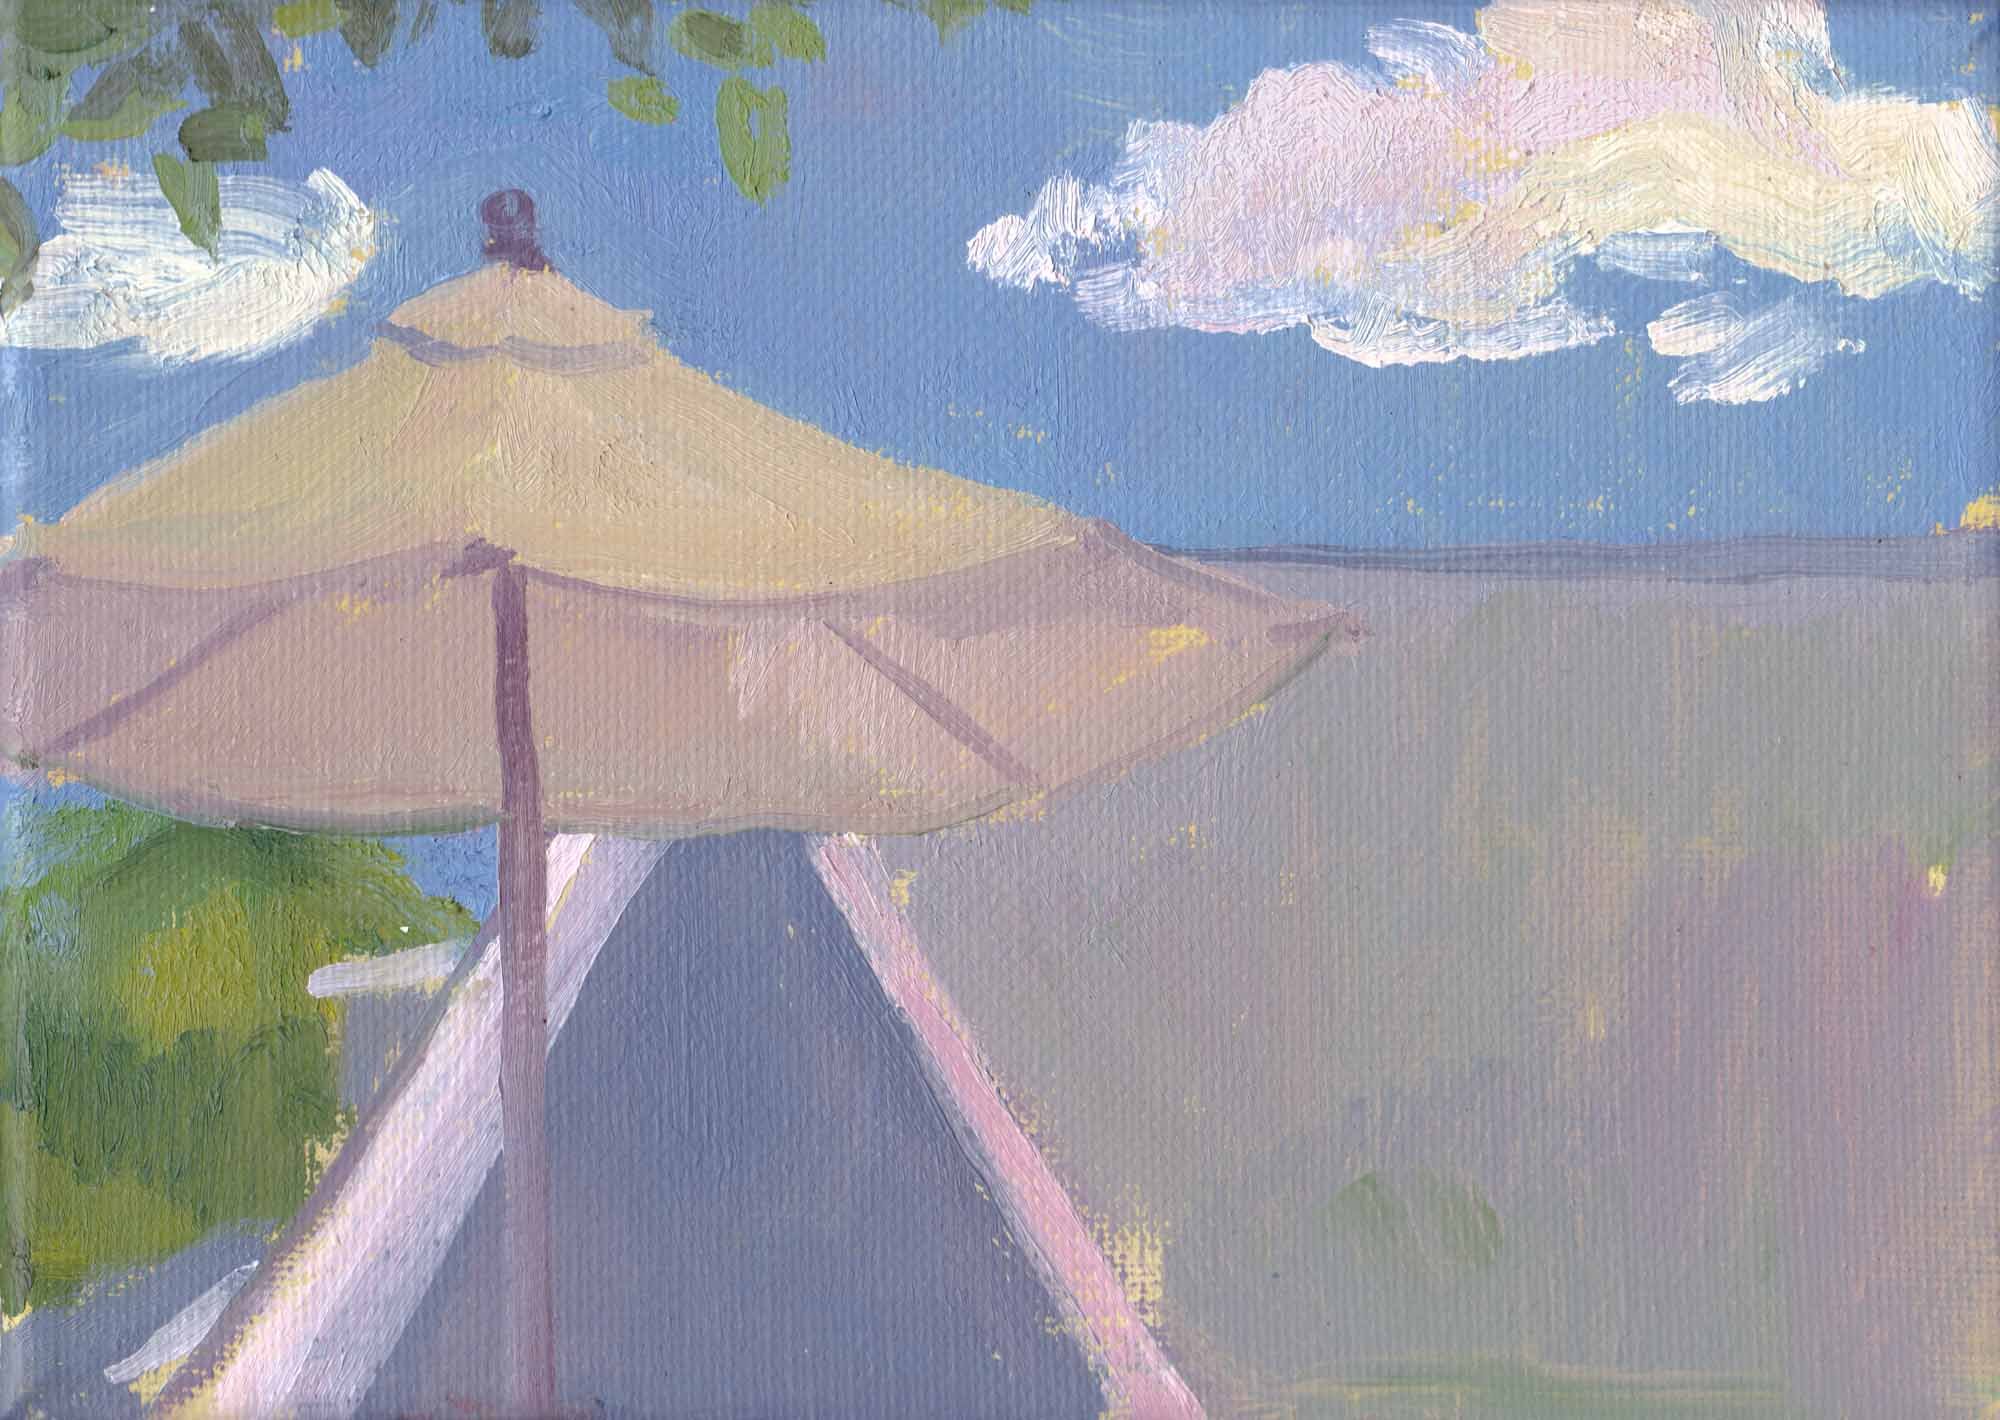    Summer Day   oil on canvas 5 x 7” 2022   collect this painting  